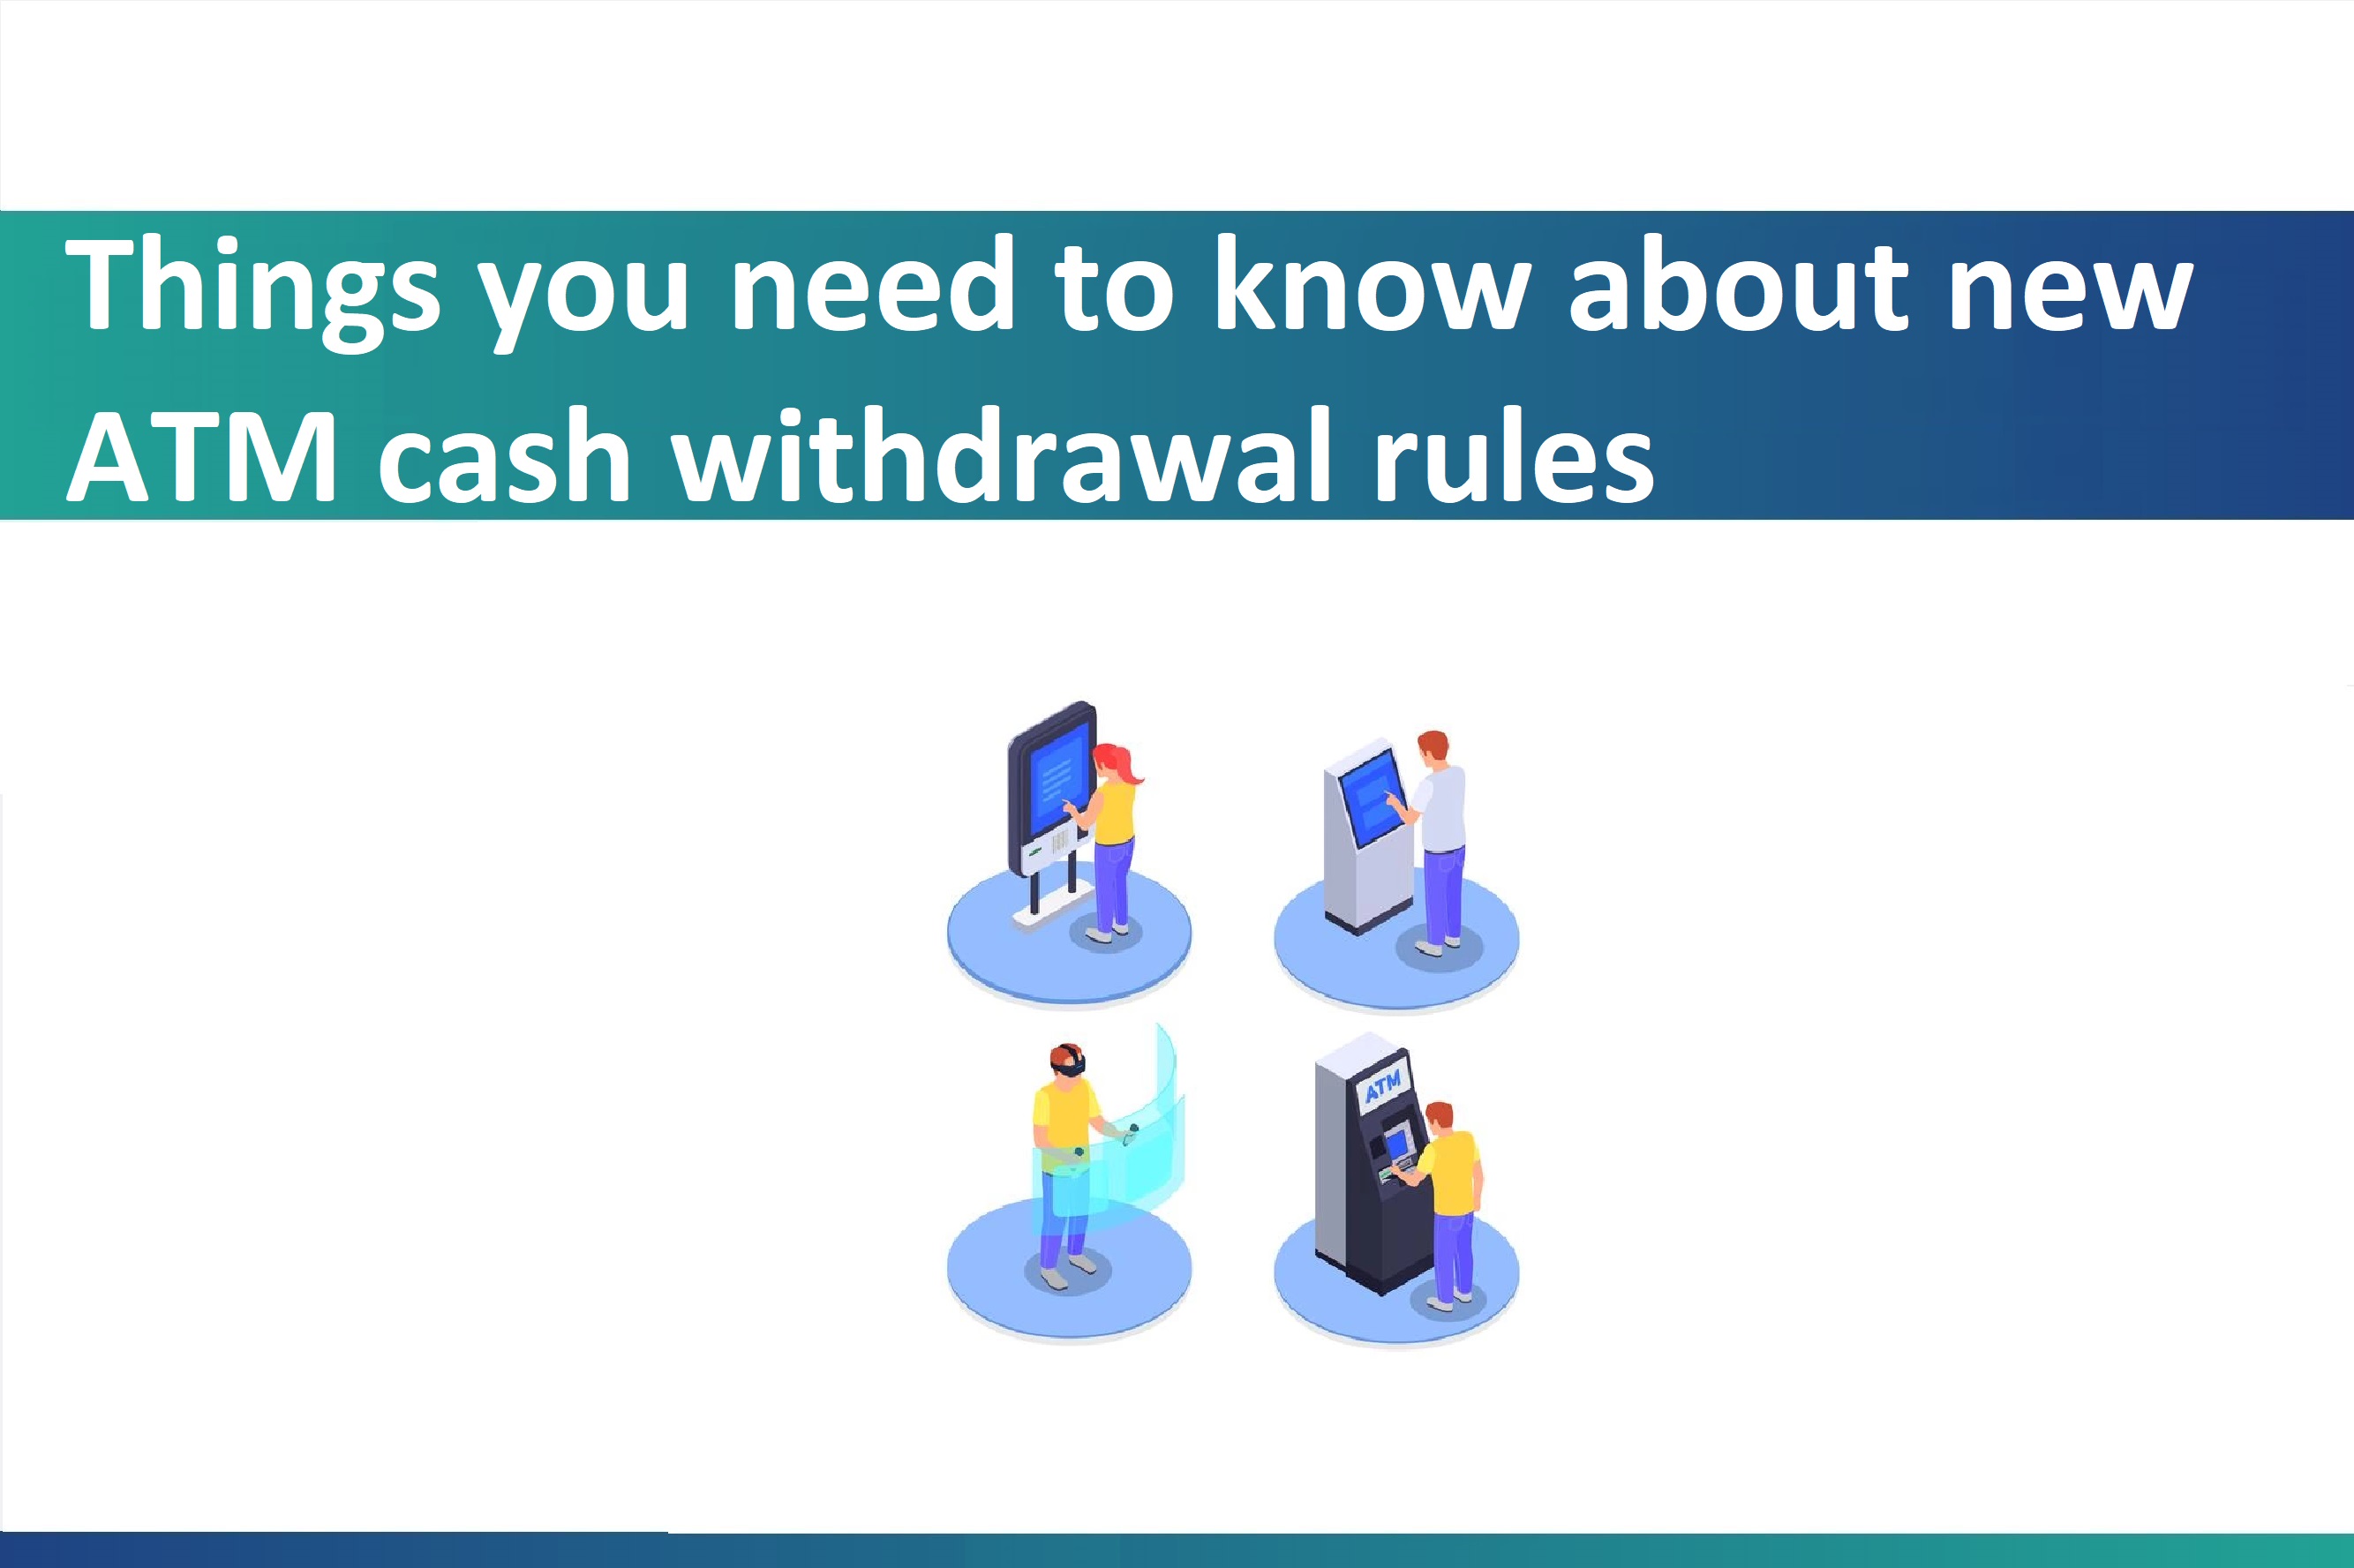 Things you need to know about new ATM cash withdrawal rules